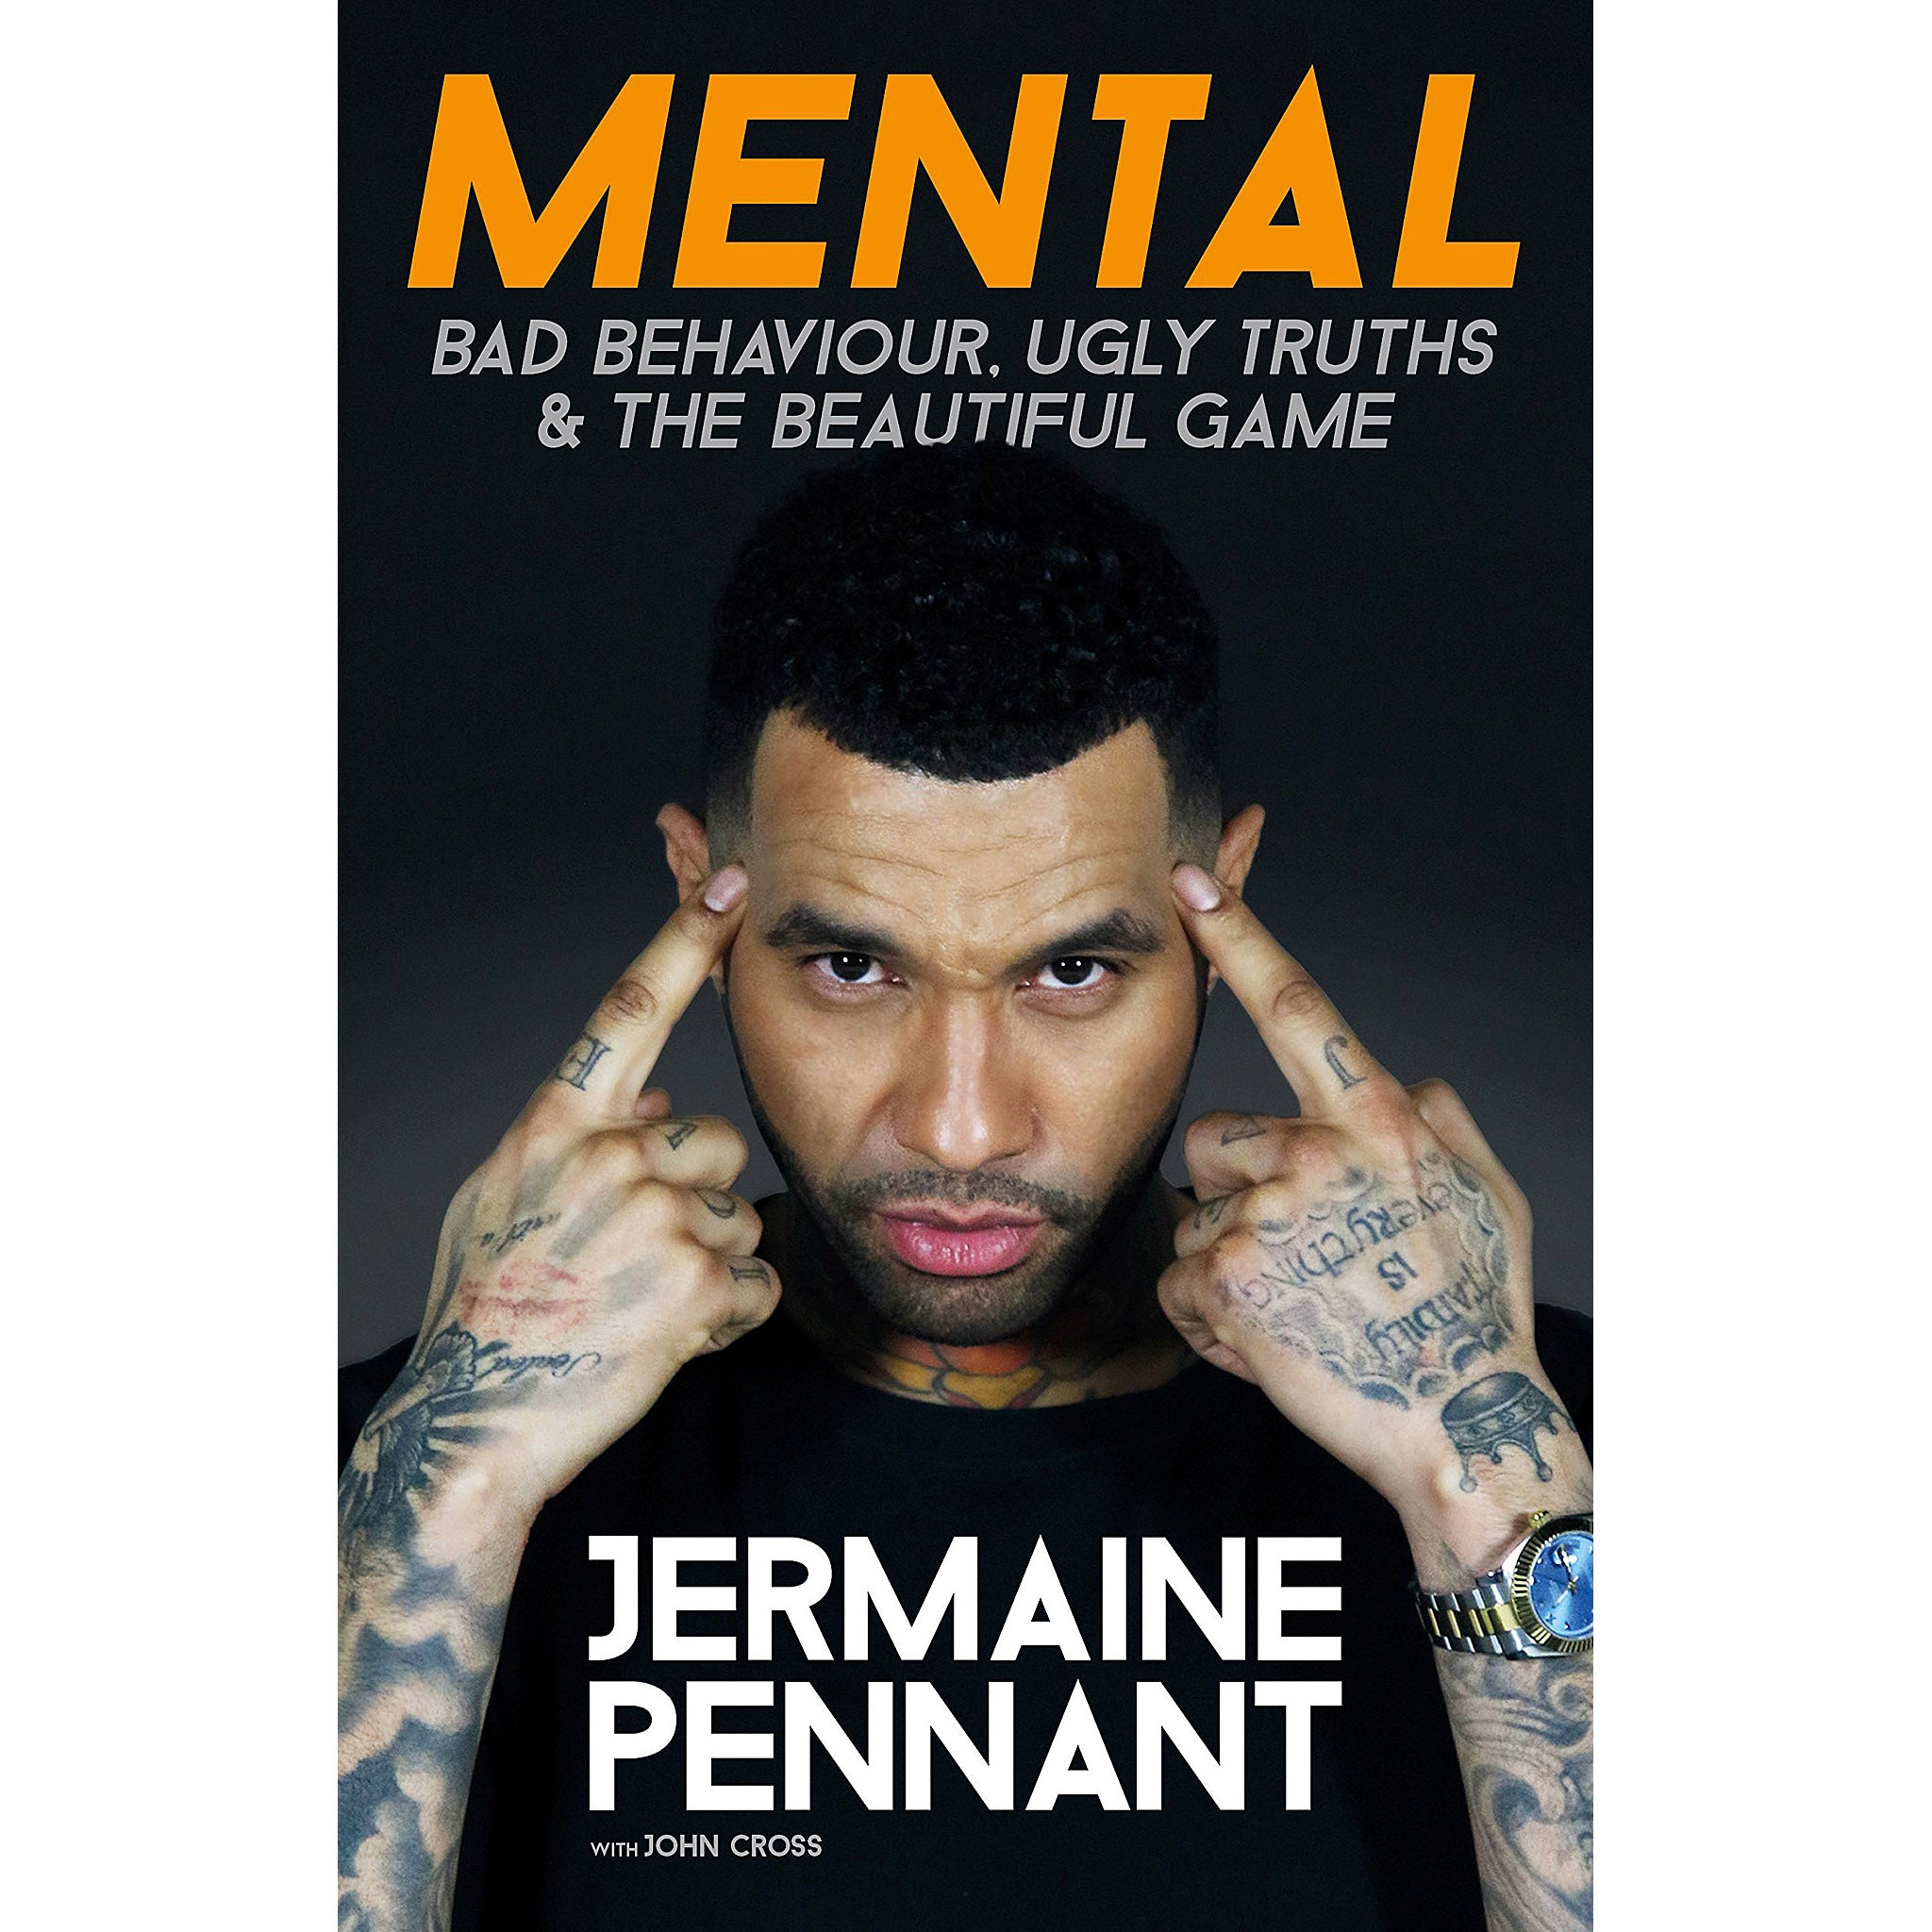 Mental – Jermaine Pennant – Bad Behaviour, Ugly Truths & The Beautiful Game